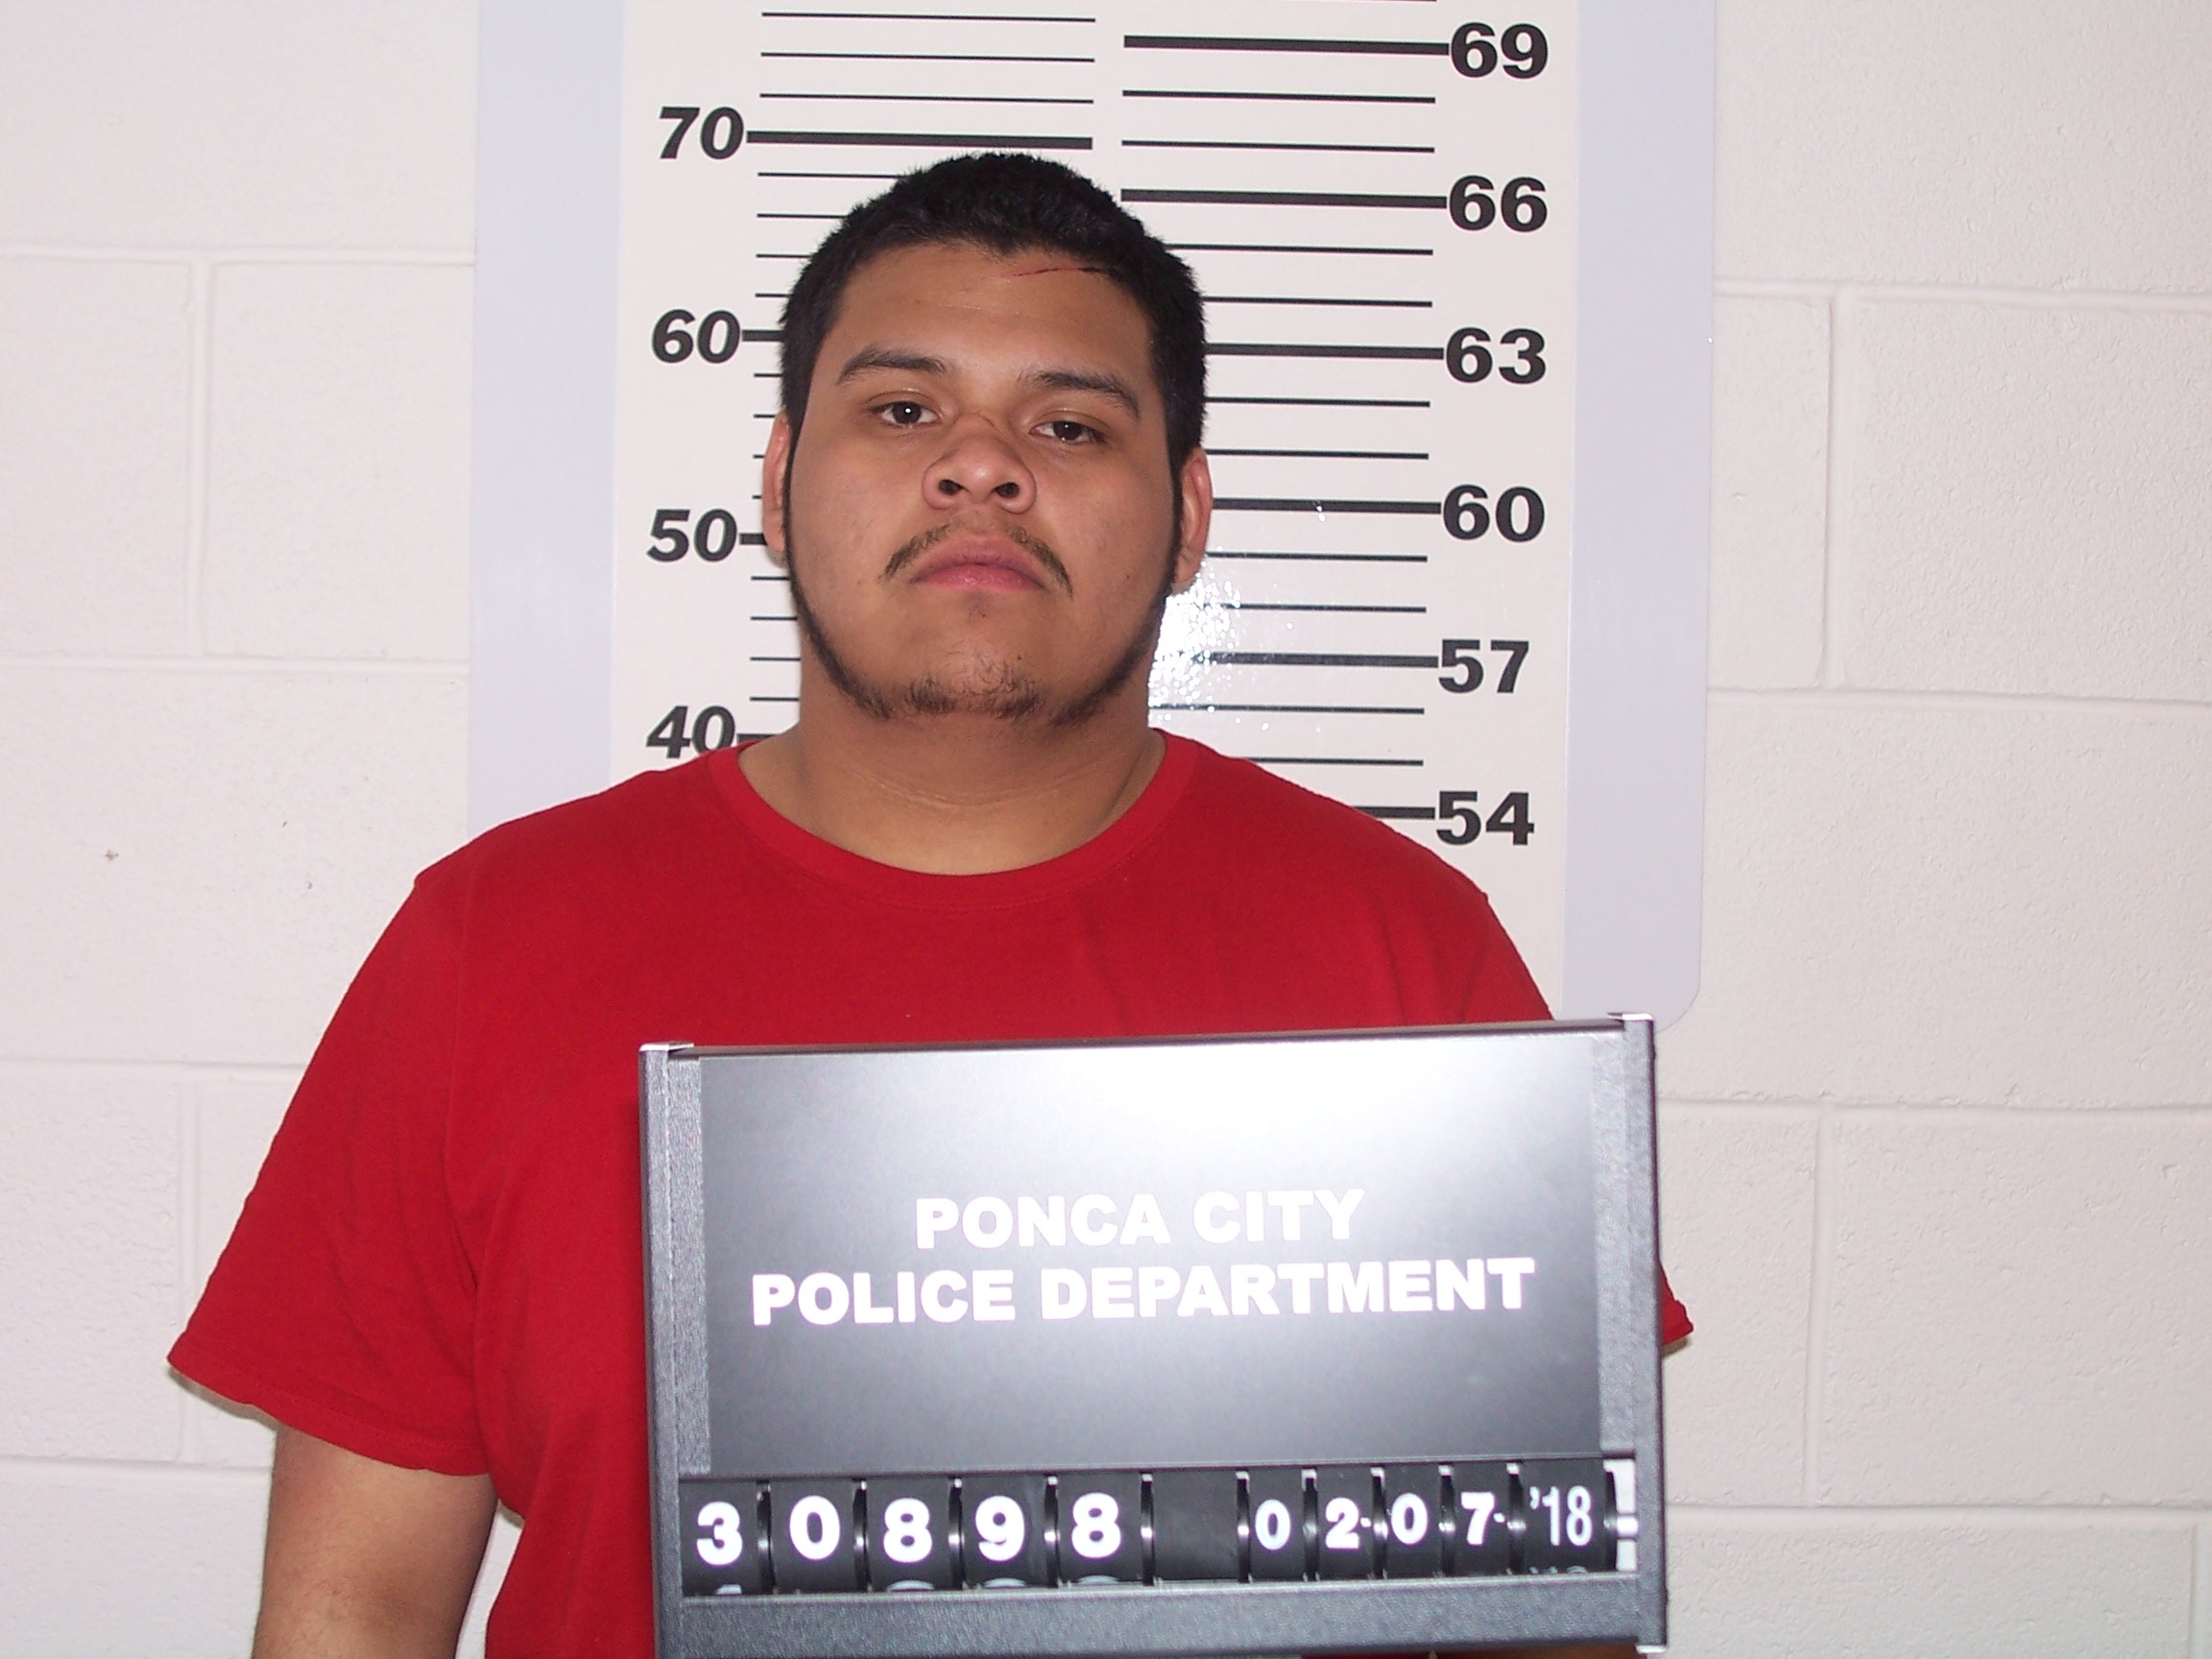 Saturday death in Ponca City ruled homicide, suspect sought